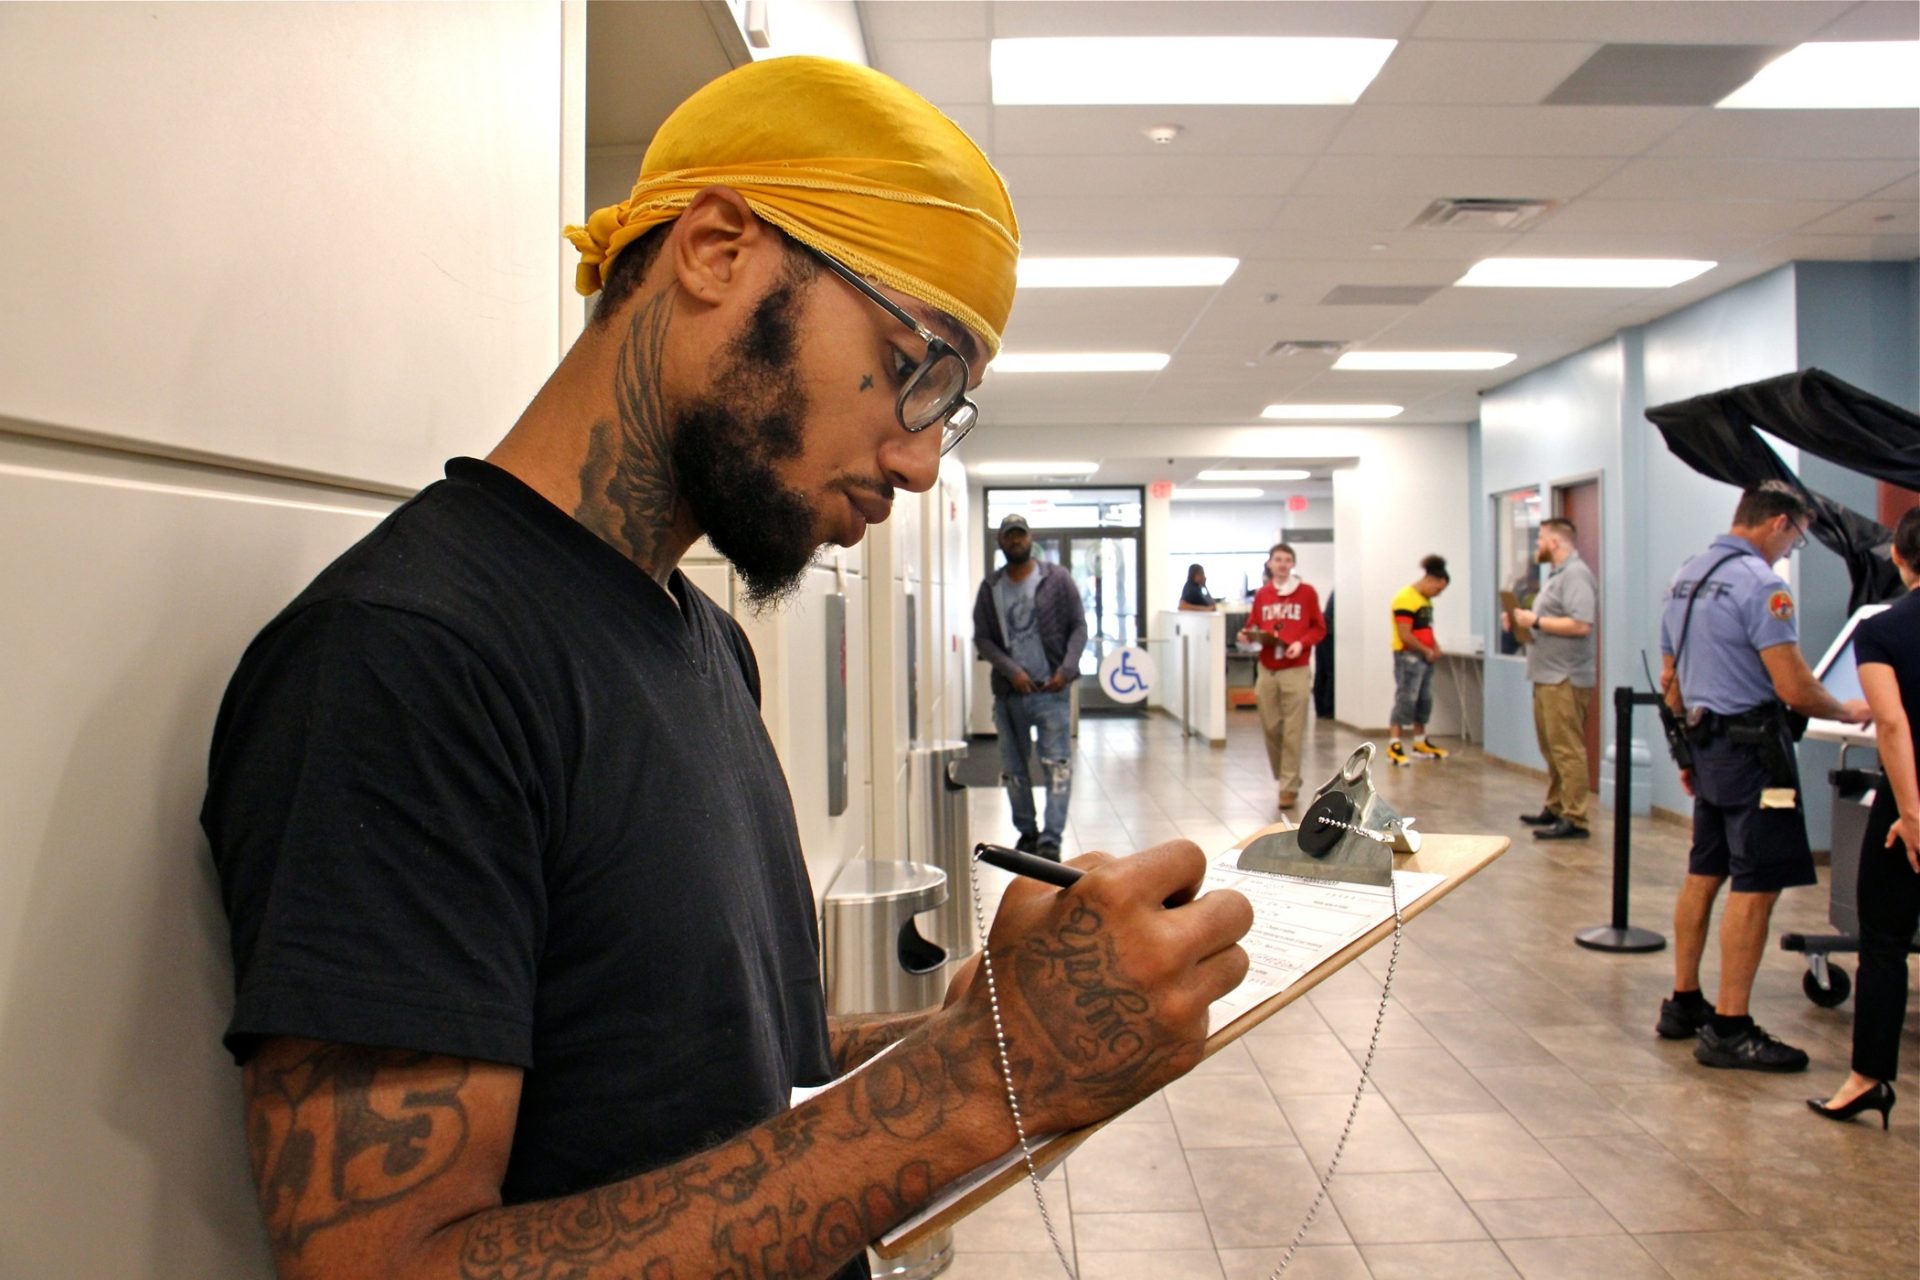 Cristofer Rojas, 21, registers to vote in the lobby of the Adult Probation and Parole Office at 7th and Market streets, where a voter registration event was held to make parolees aware that their convictions do not prevent them from voting in Pennsylvania.